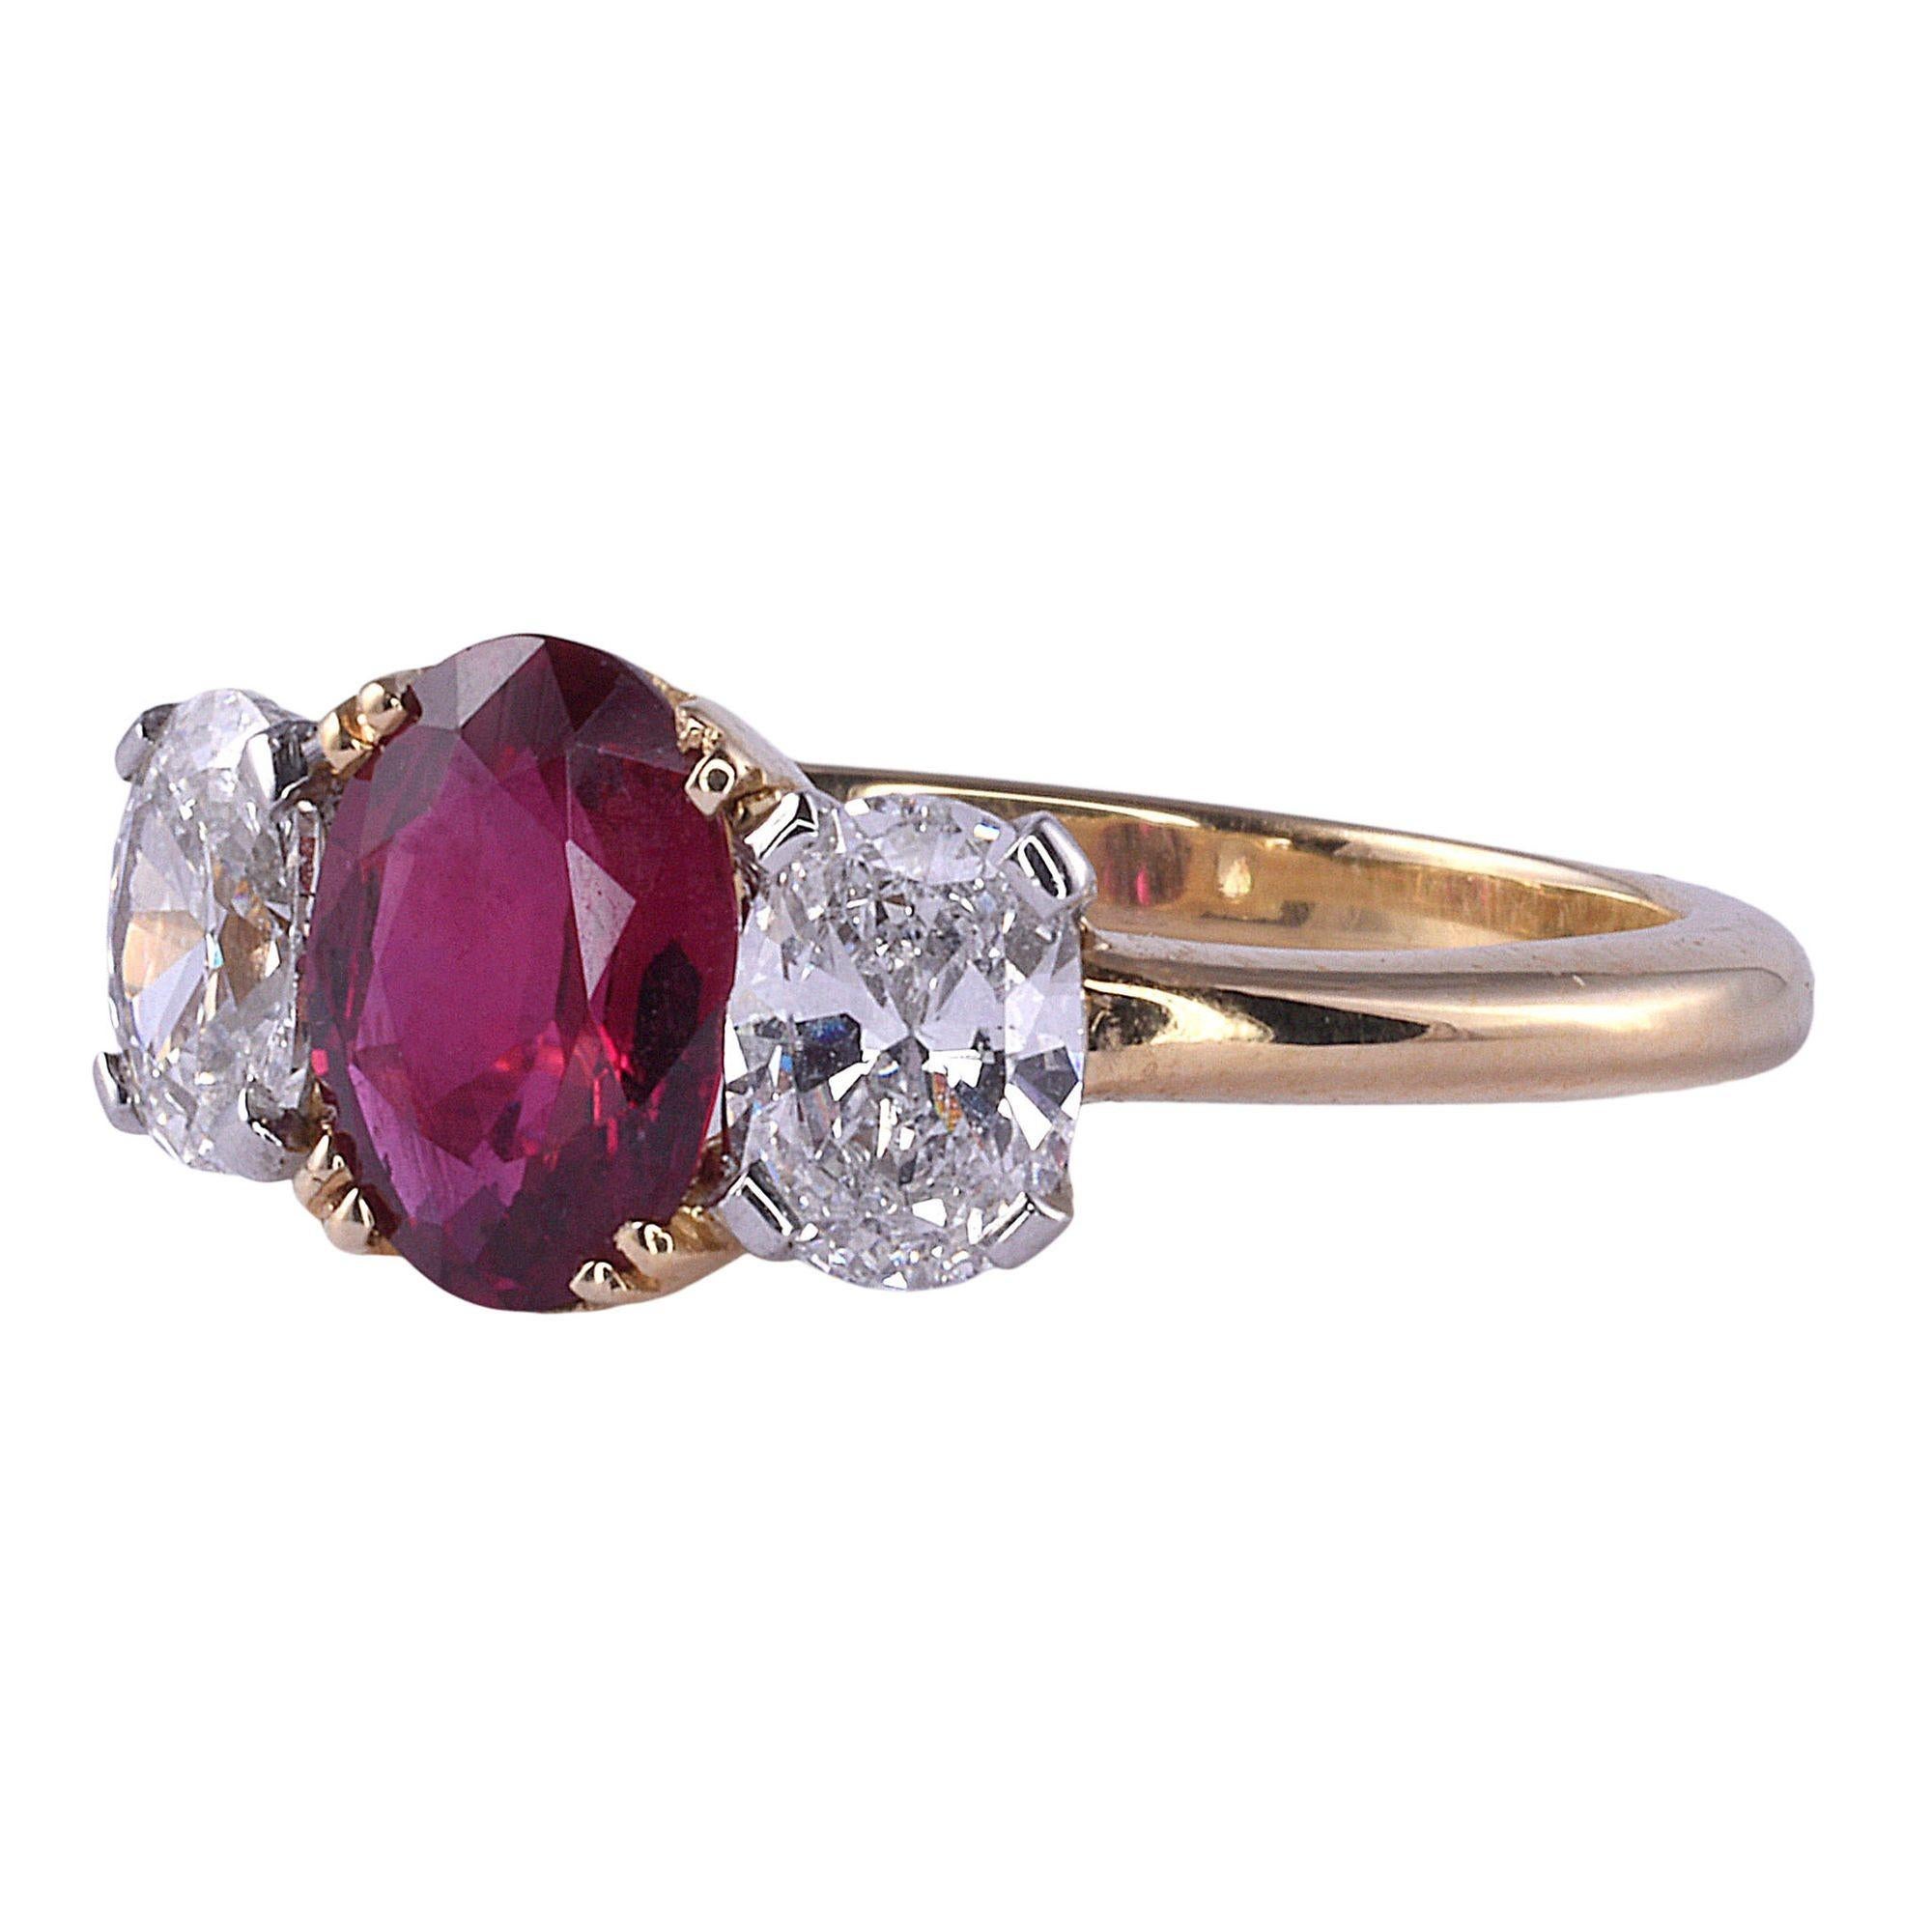 Estate GIA certified oval ruby & oval diamond 18K ring. This estate ring is crafted in 18 karat yellow gold and platinum featuring a GIA certified 1 carat ruby. The ruby has very fine color and has been heat treat as with most on the market. It is